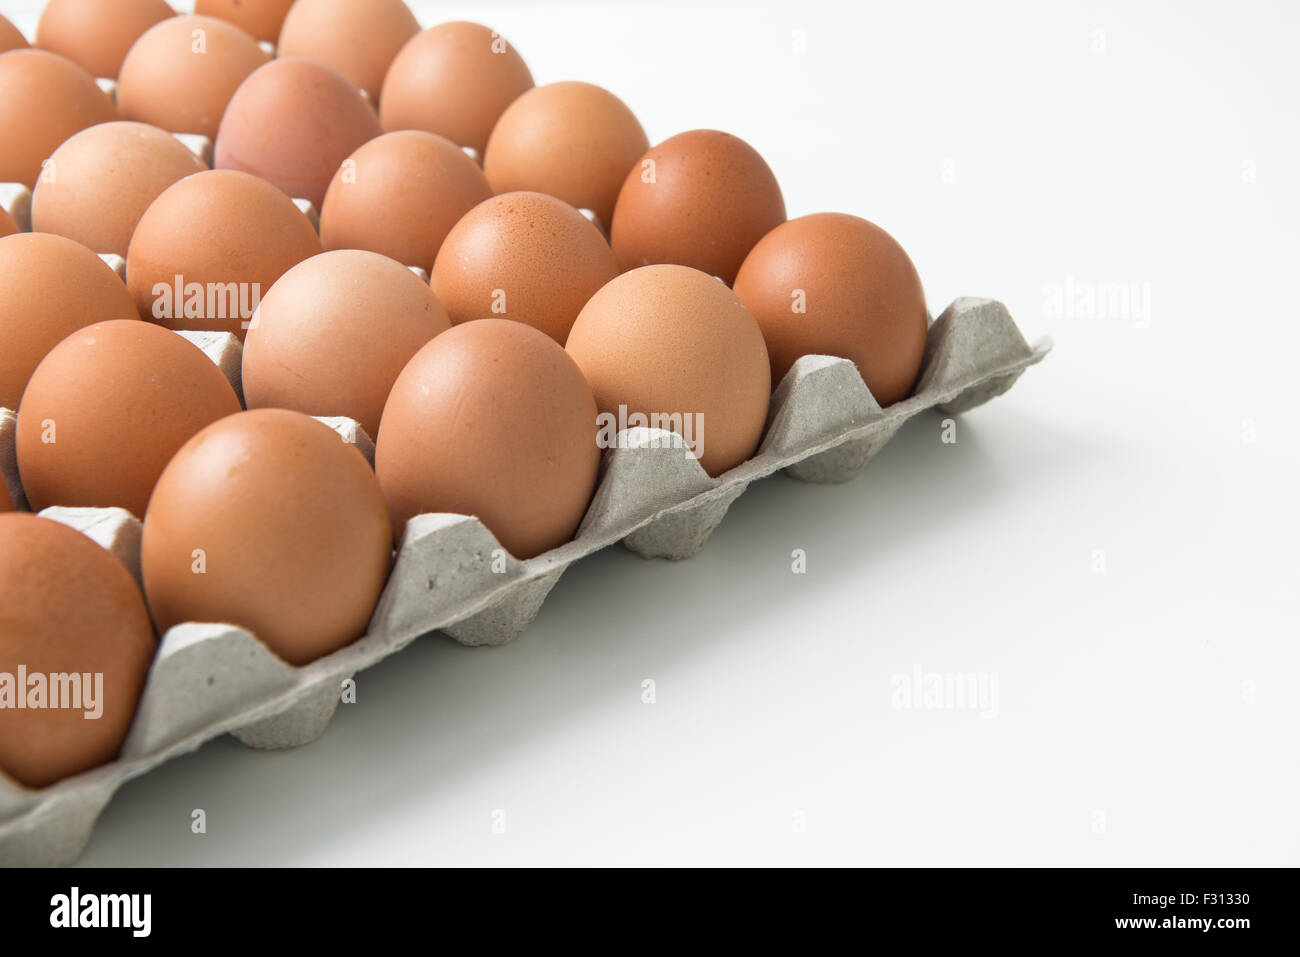 eggs in carton package Stock Photo